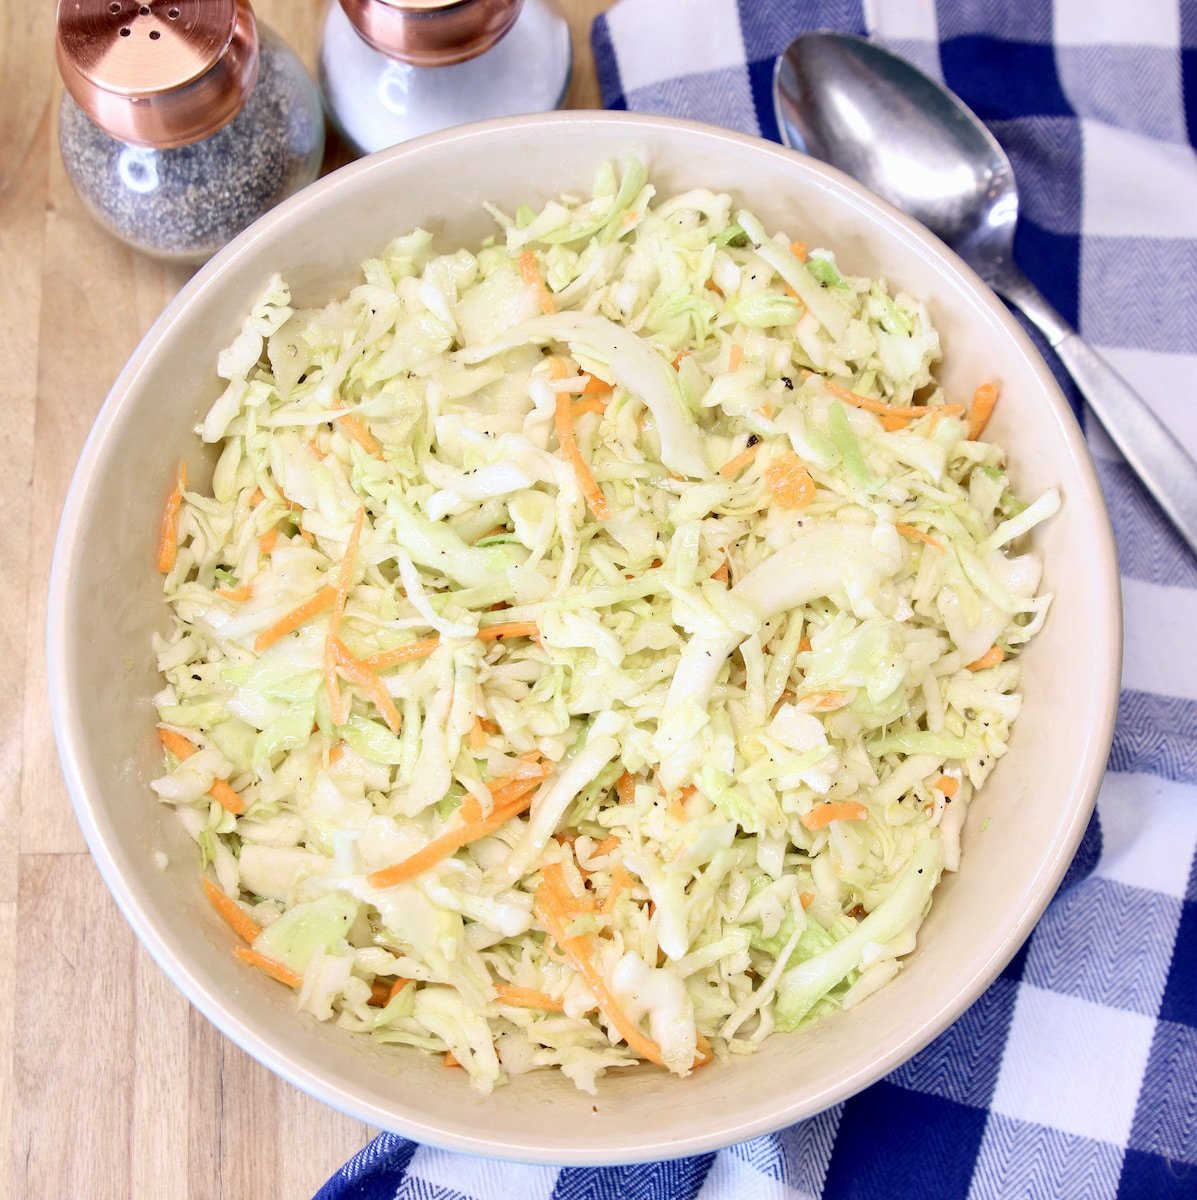 Bowl with coleslaw